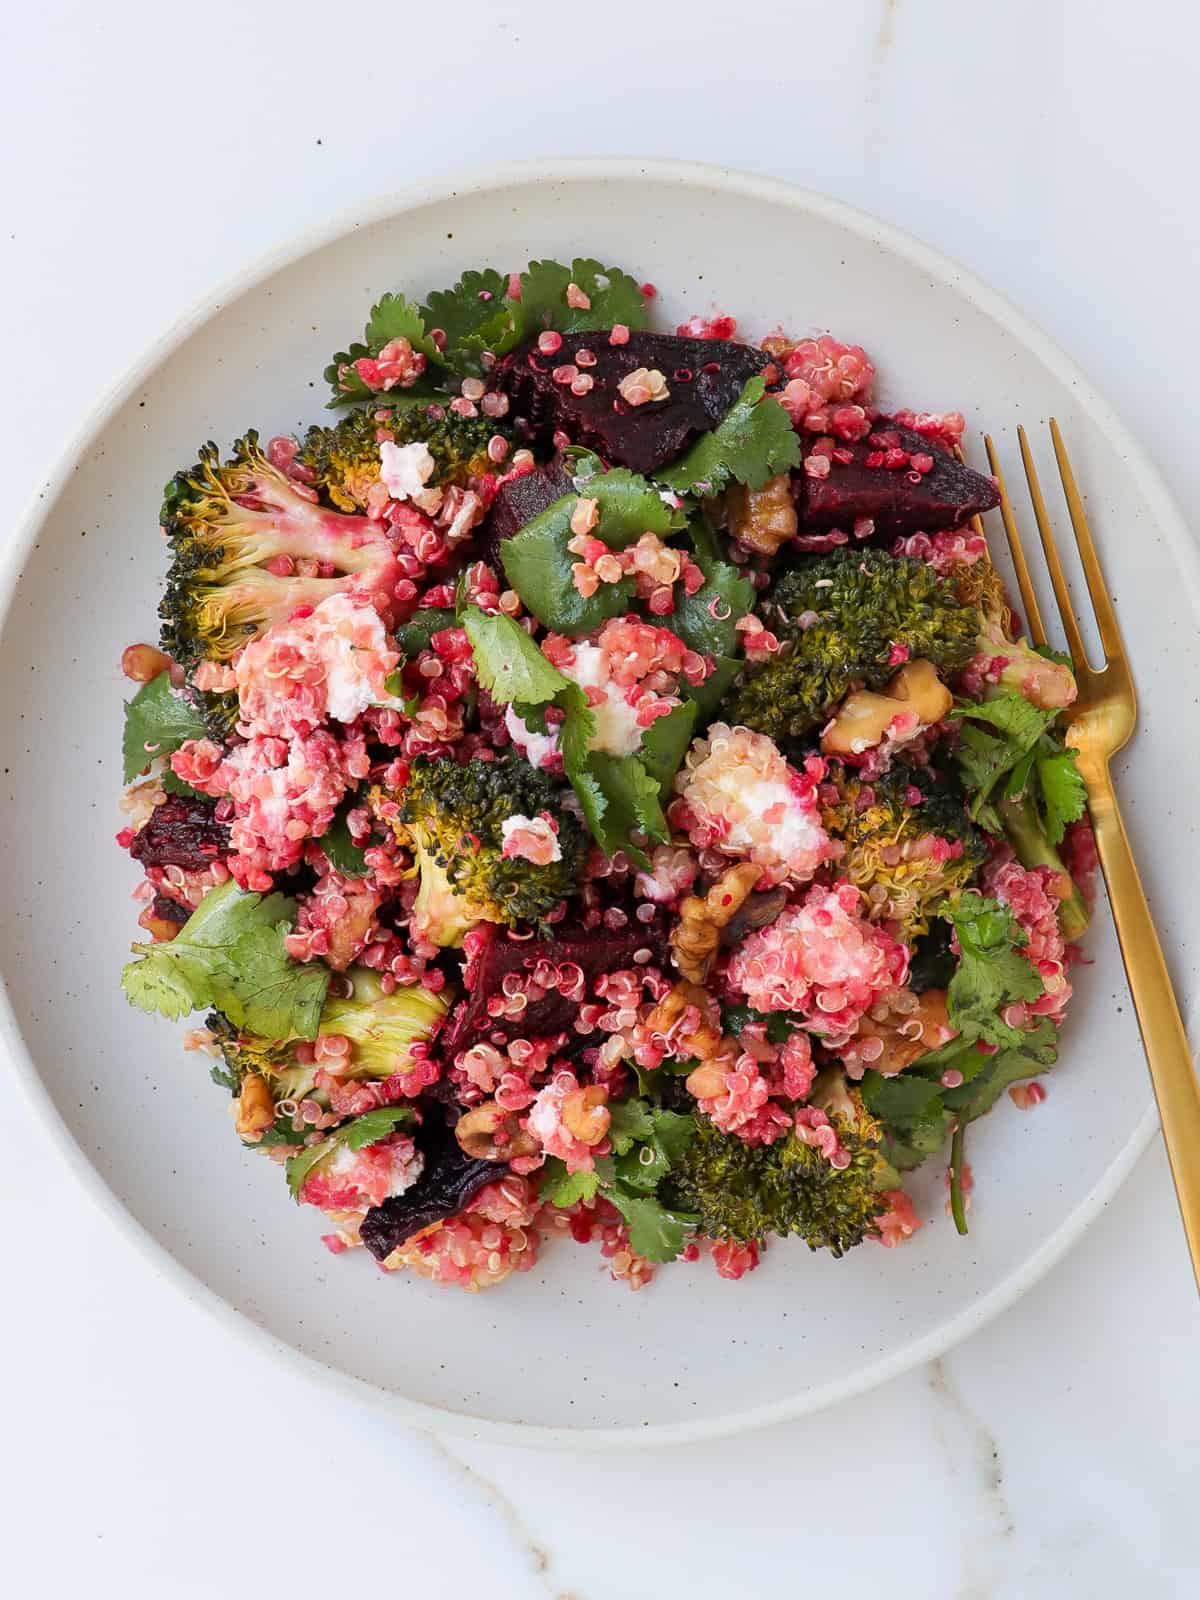 Beetroot and broccoli salad on a plate.